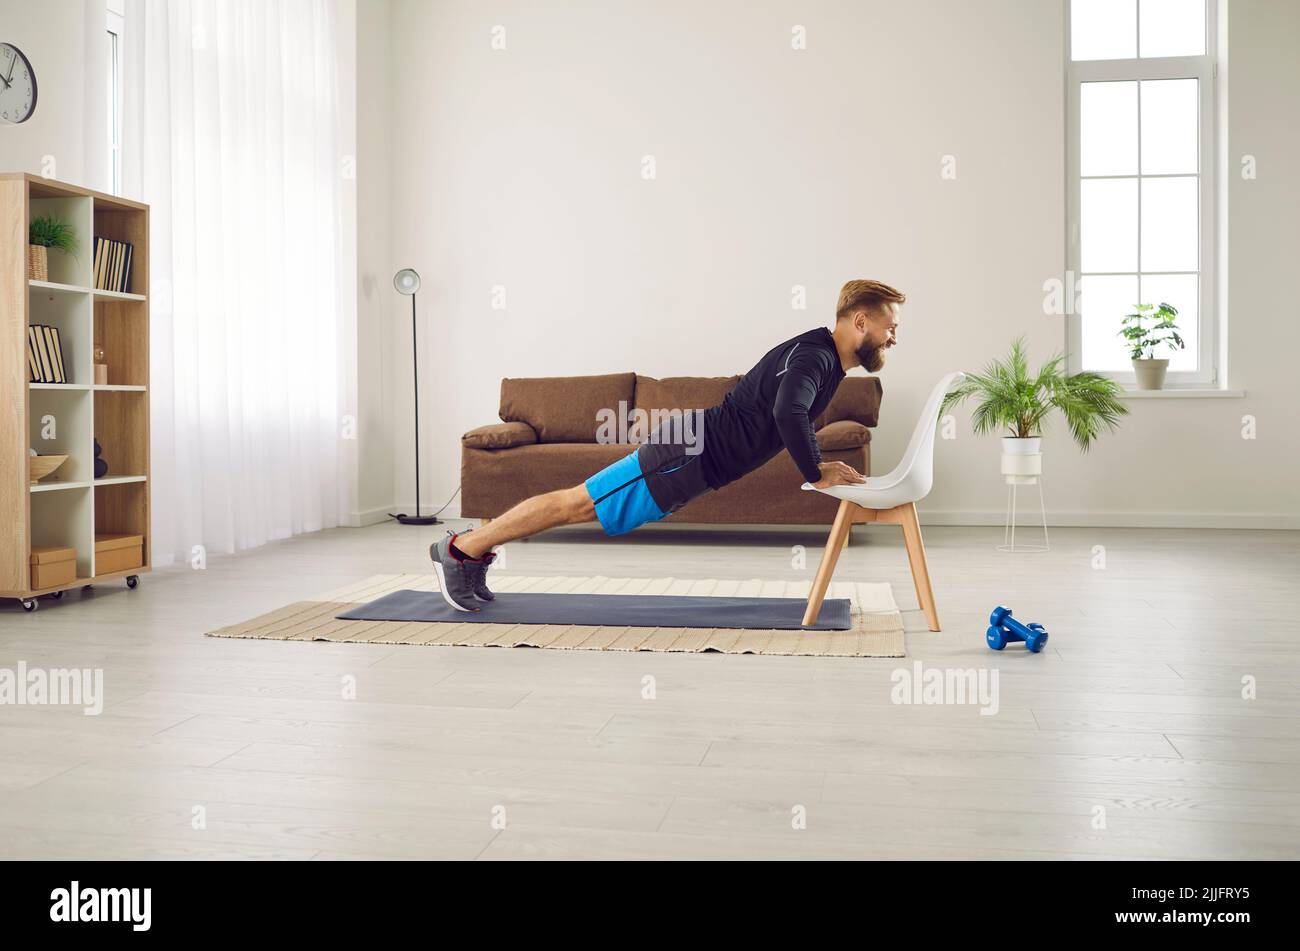 Athletic man is doing push up exercise with chair at home in his living room with modern interior. Stock Photo